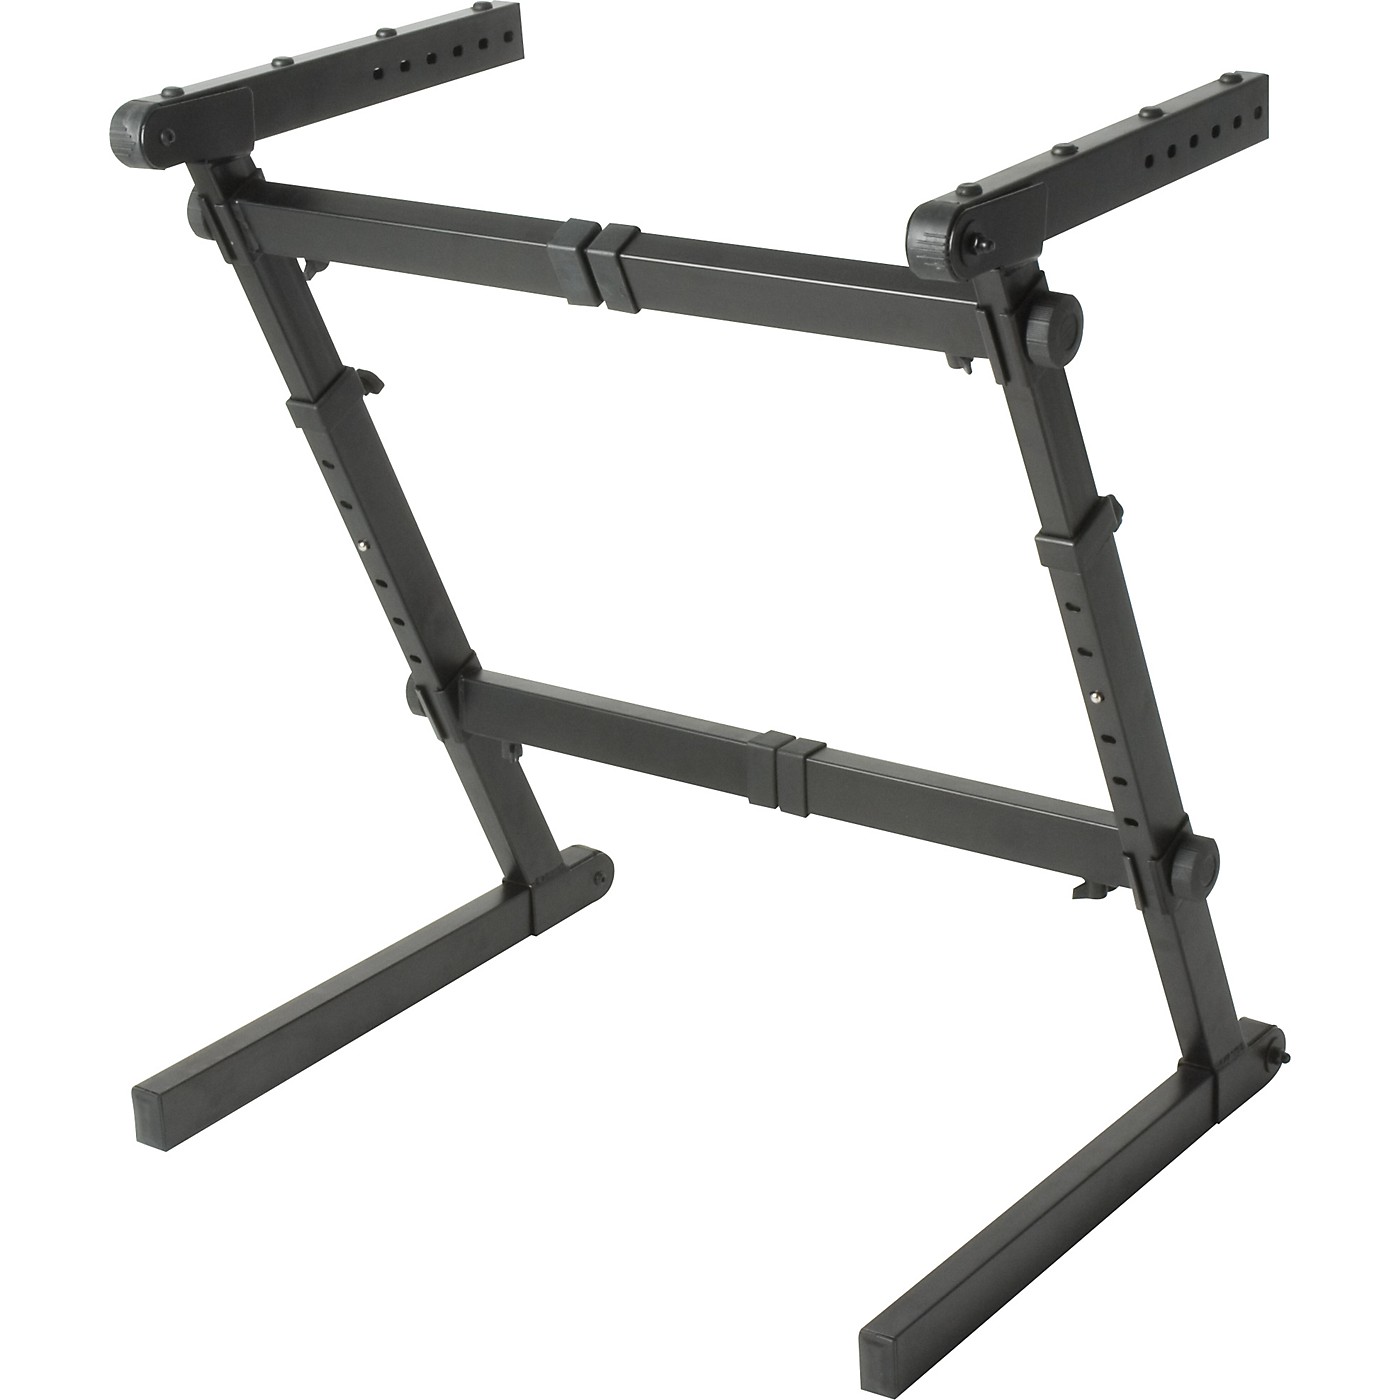 Quik-Lok Z-70 Width and Height Adjustable Z Keyboard Stand thumbnail